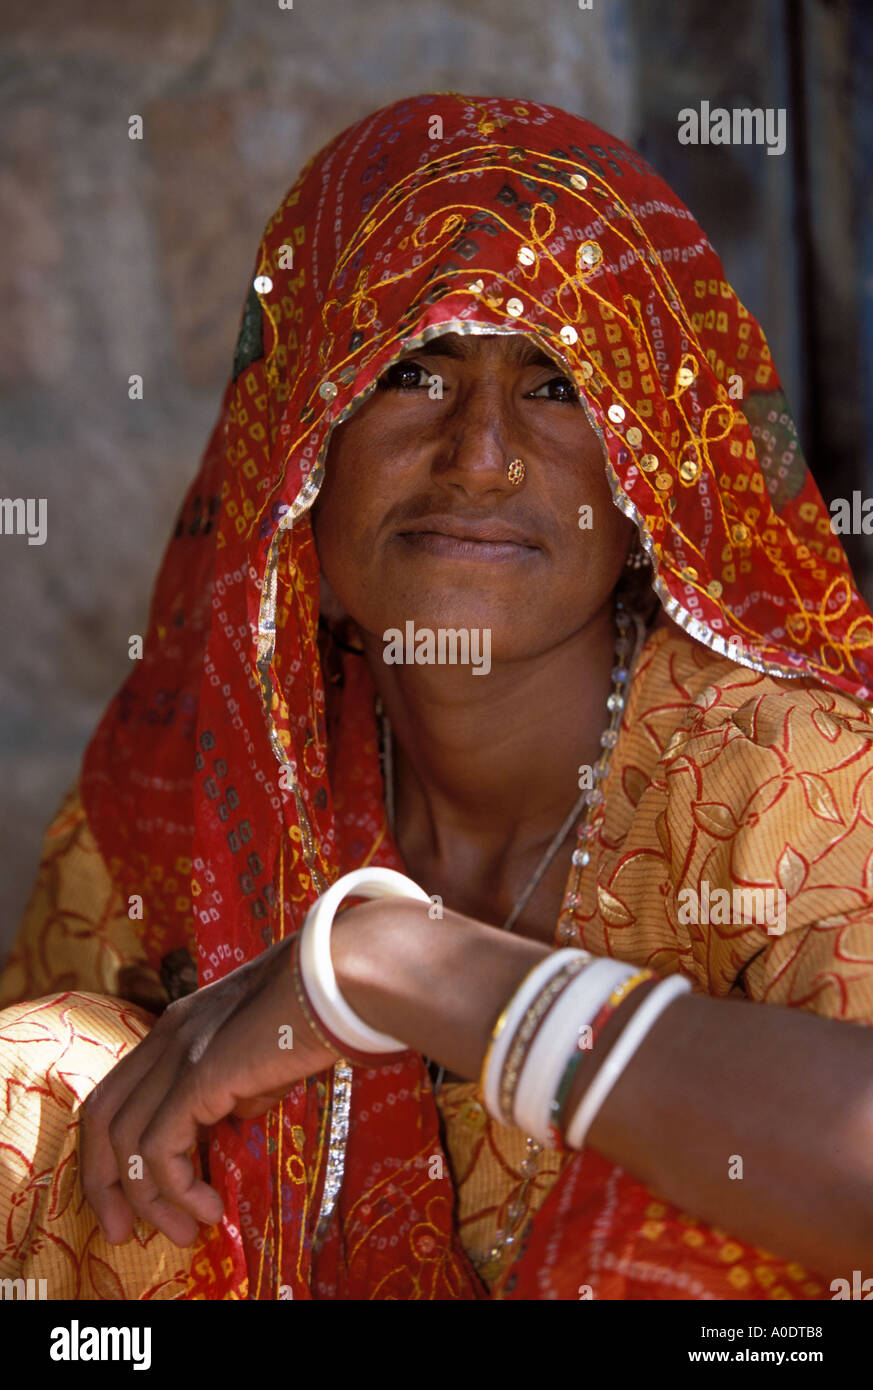 Bishnoi Indigenous woman Native tribes and cultures of the Rajasthan desert India Stock Photo